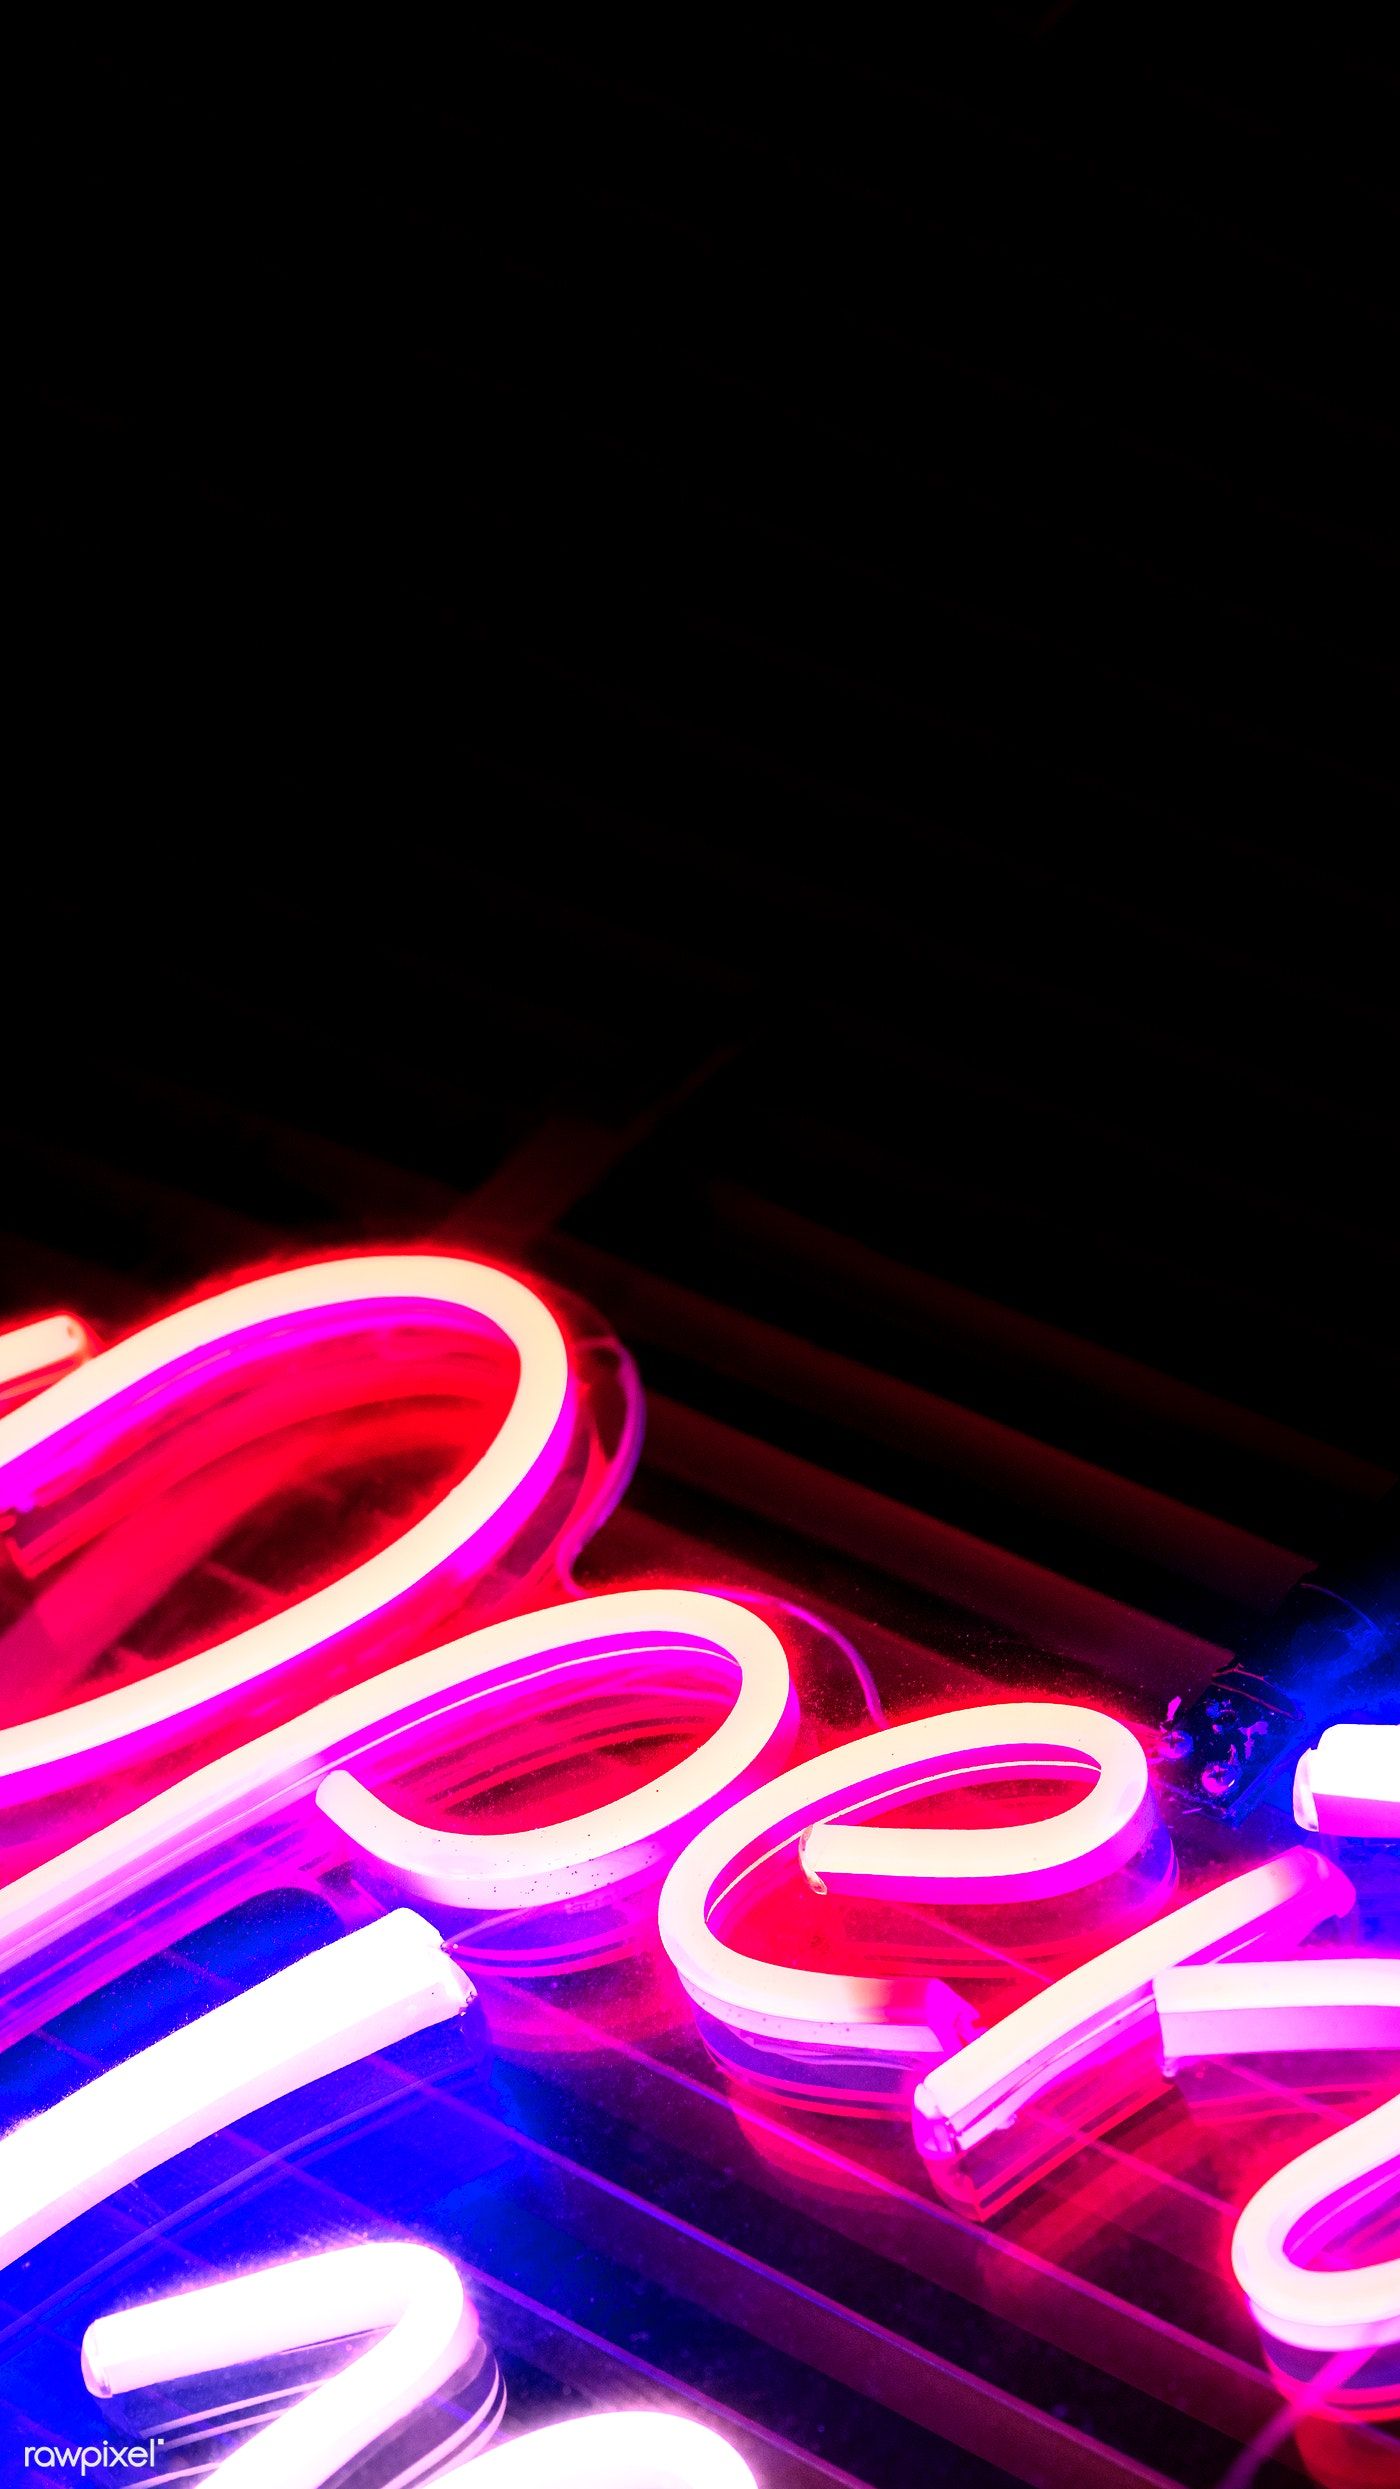 Neon pink open sign on black mobile wallpaper. free image / Teddy Rawpixel. Open signs, Mobile wallpaper, Neon